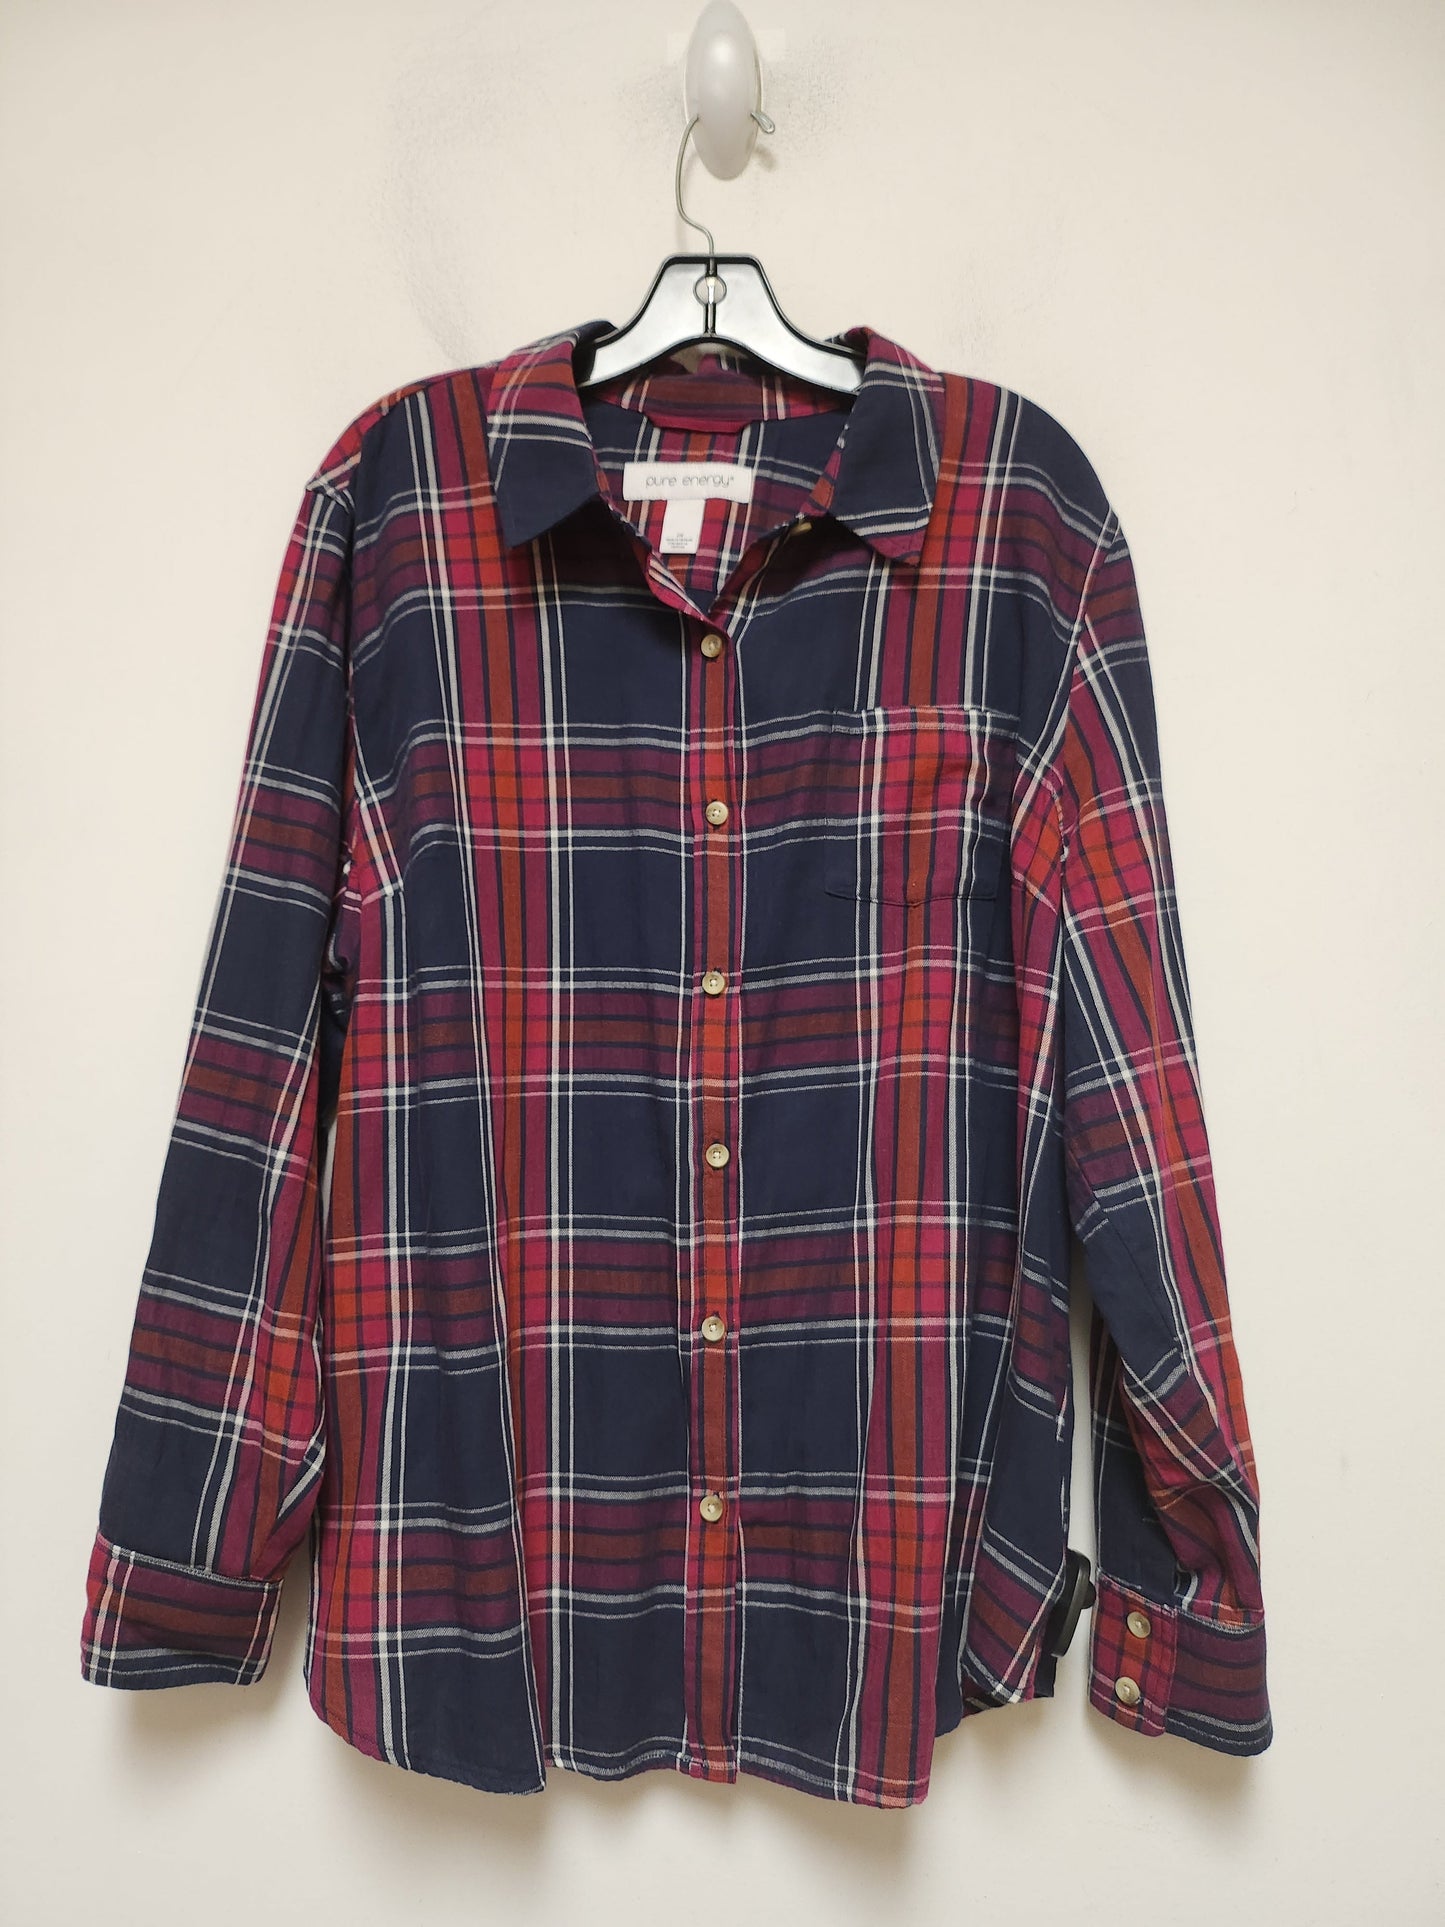 Plaid Pattern Top Long Sleeve Pure Energy, Size 2x